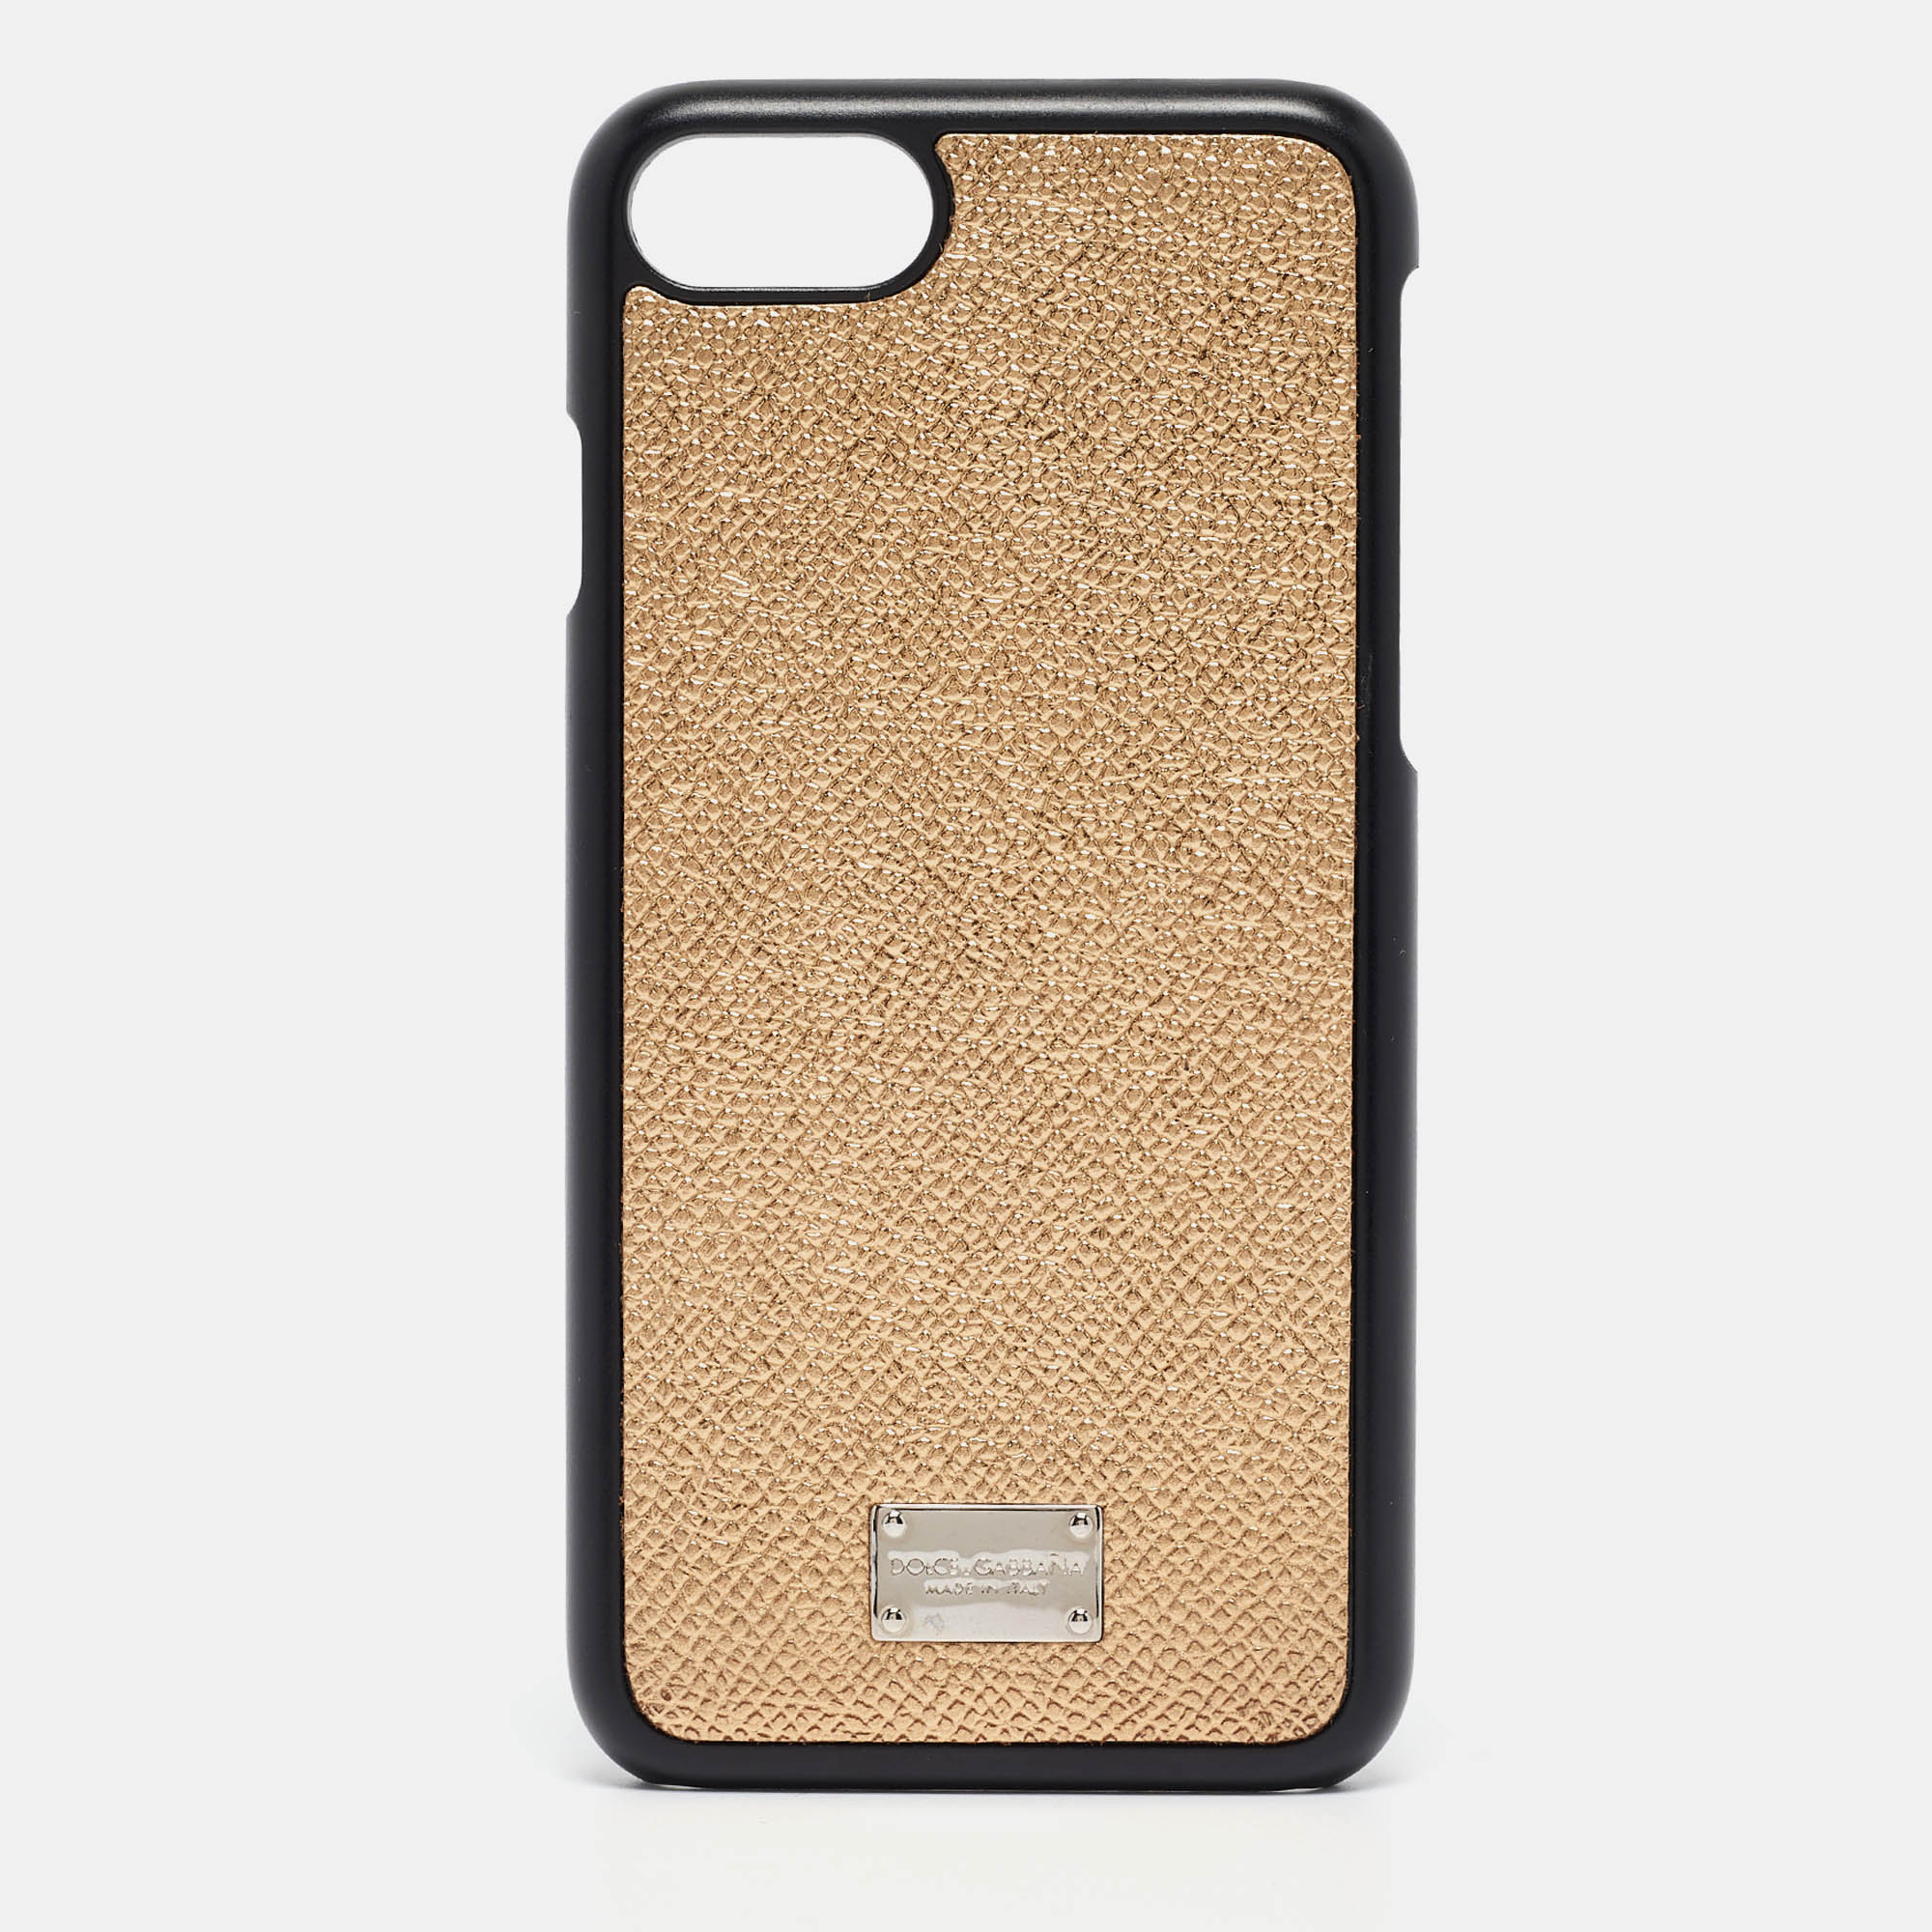 Dolce & gabbana gold/black leather iphone 6 cover